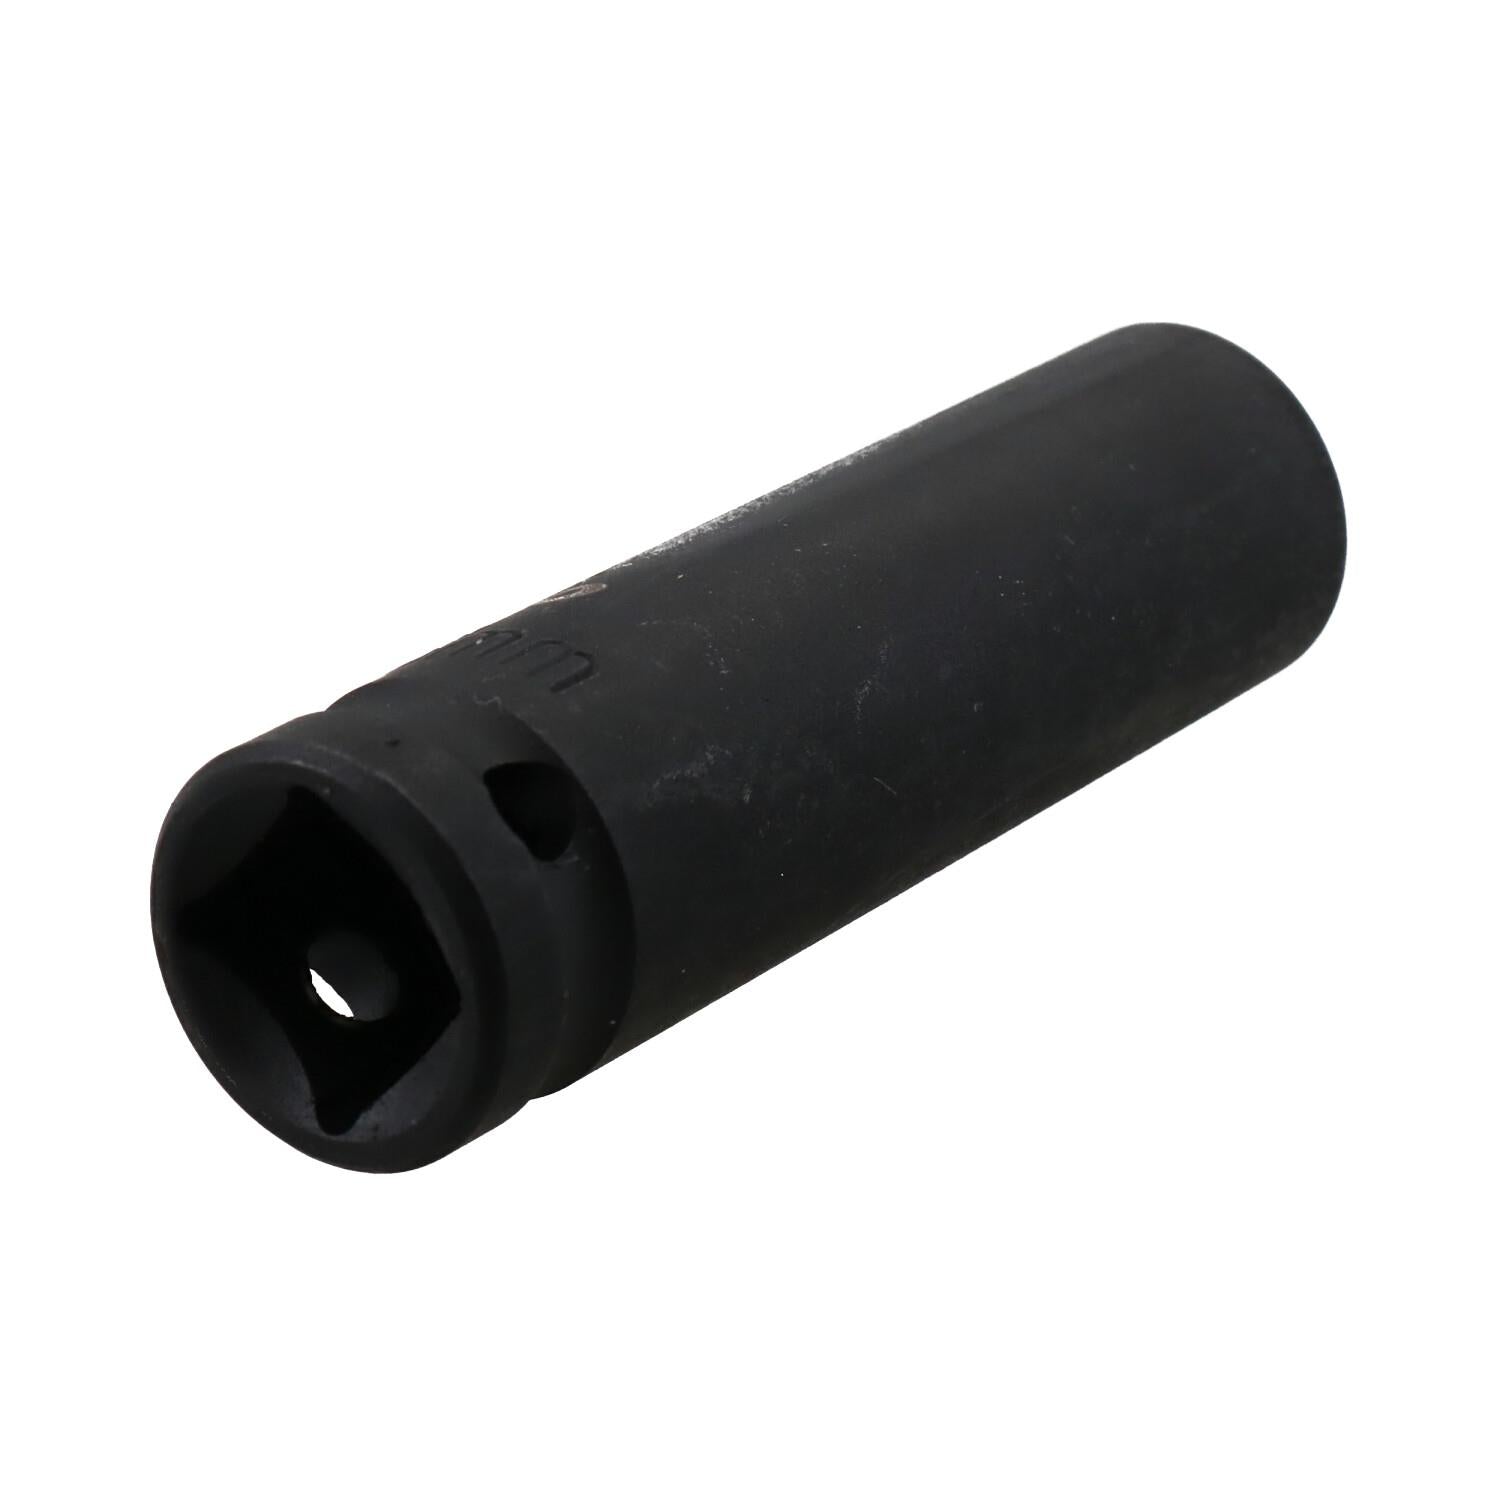 16mm 1/2" Drive Double deep Metric Impacted Impact Socket Single Hex 6 Sided